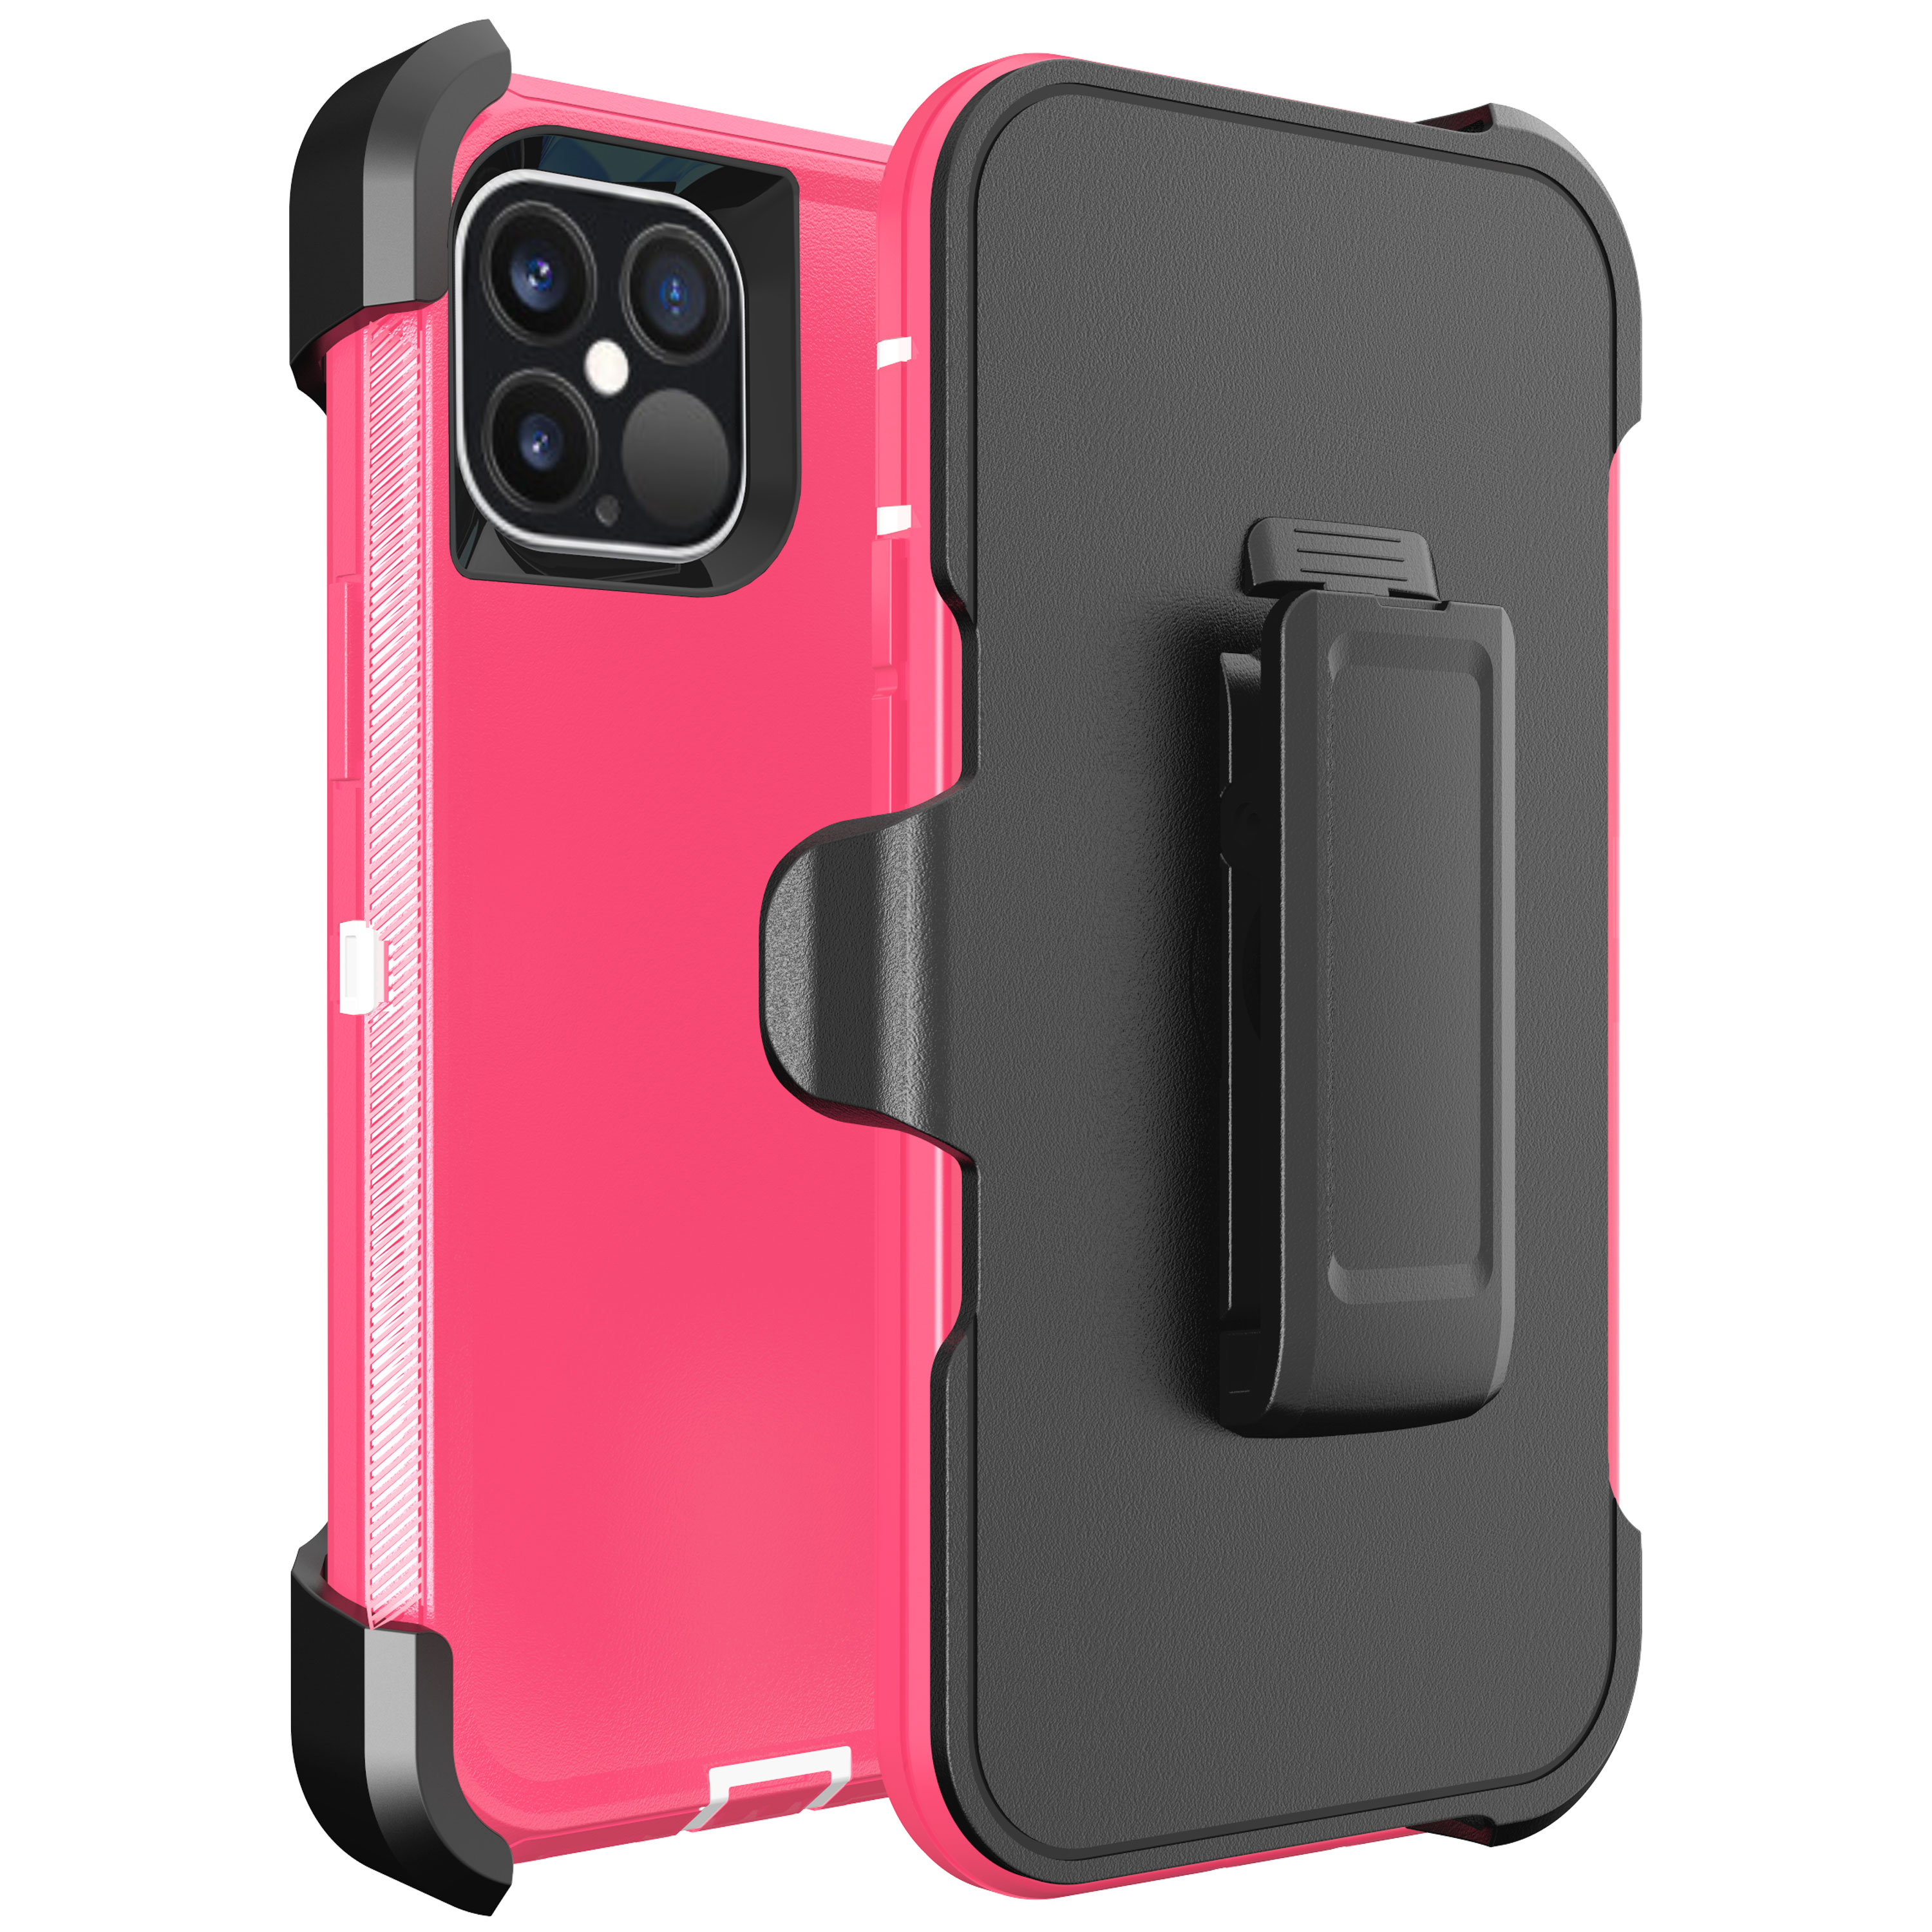 Armor Robot Case With Clip for iPHONE 12 / 12 Pro 6.1 (Hot Pink - White)